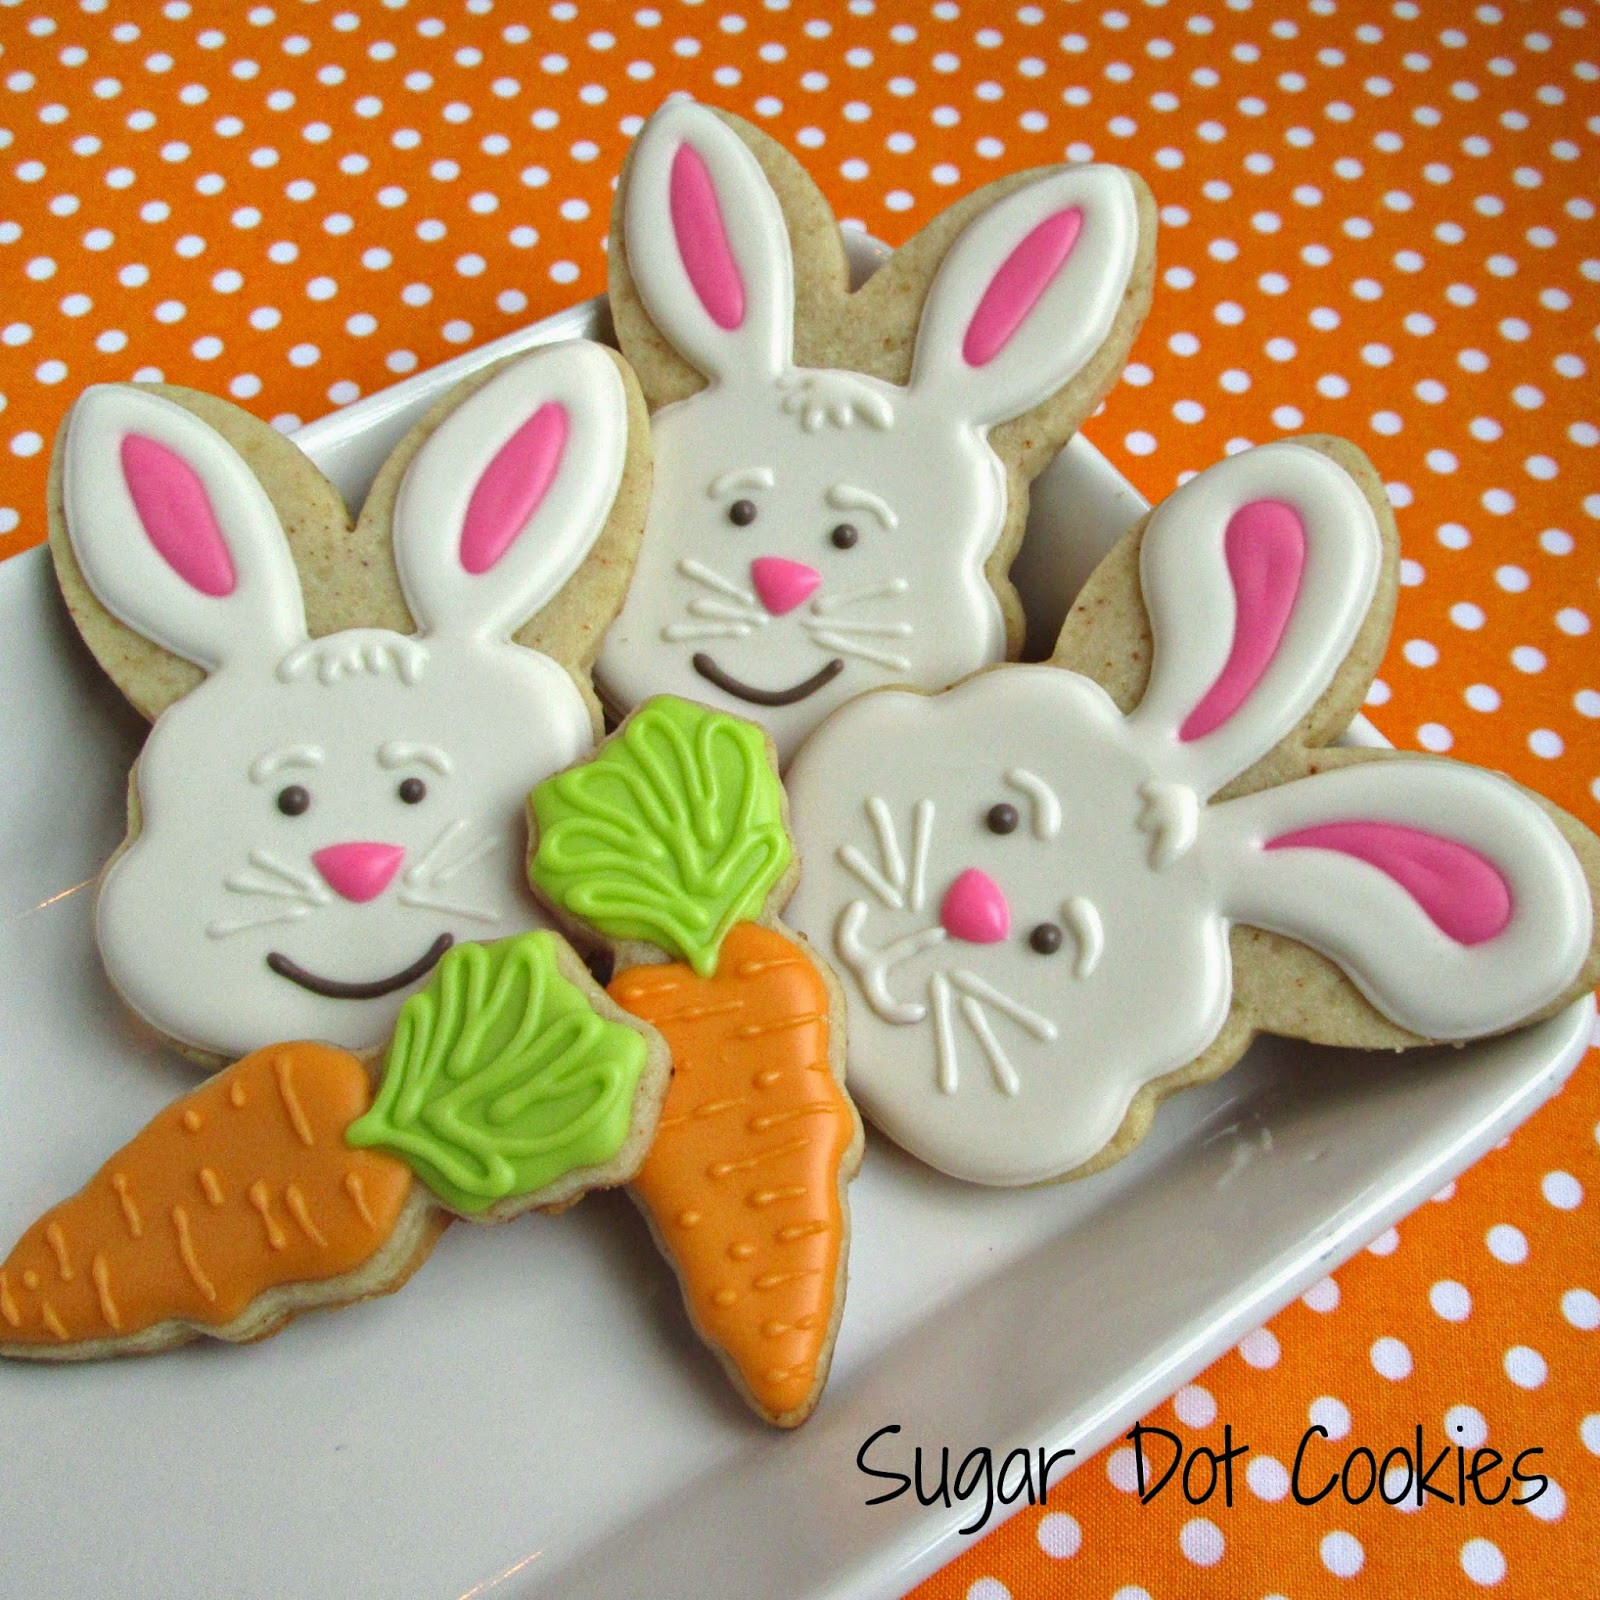 Easter Decorated Sugar Cookies
 Hatching bunnies and chicks and polka dot Easter eggs